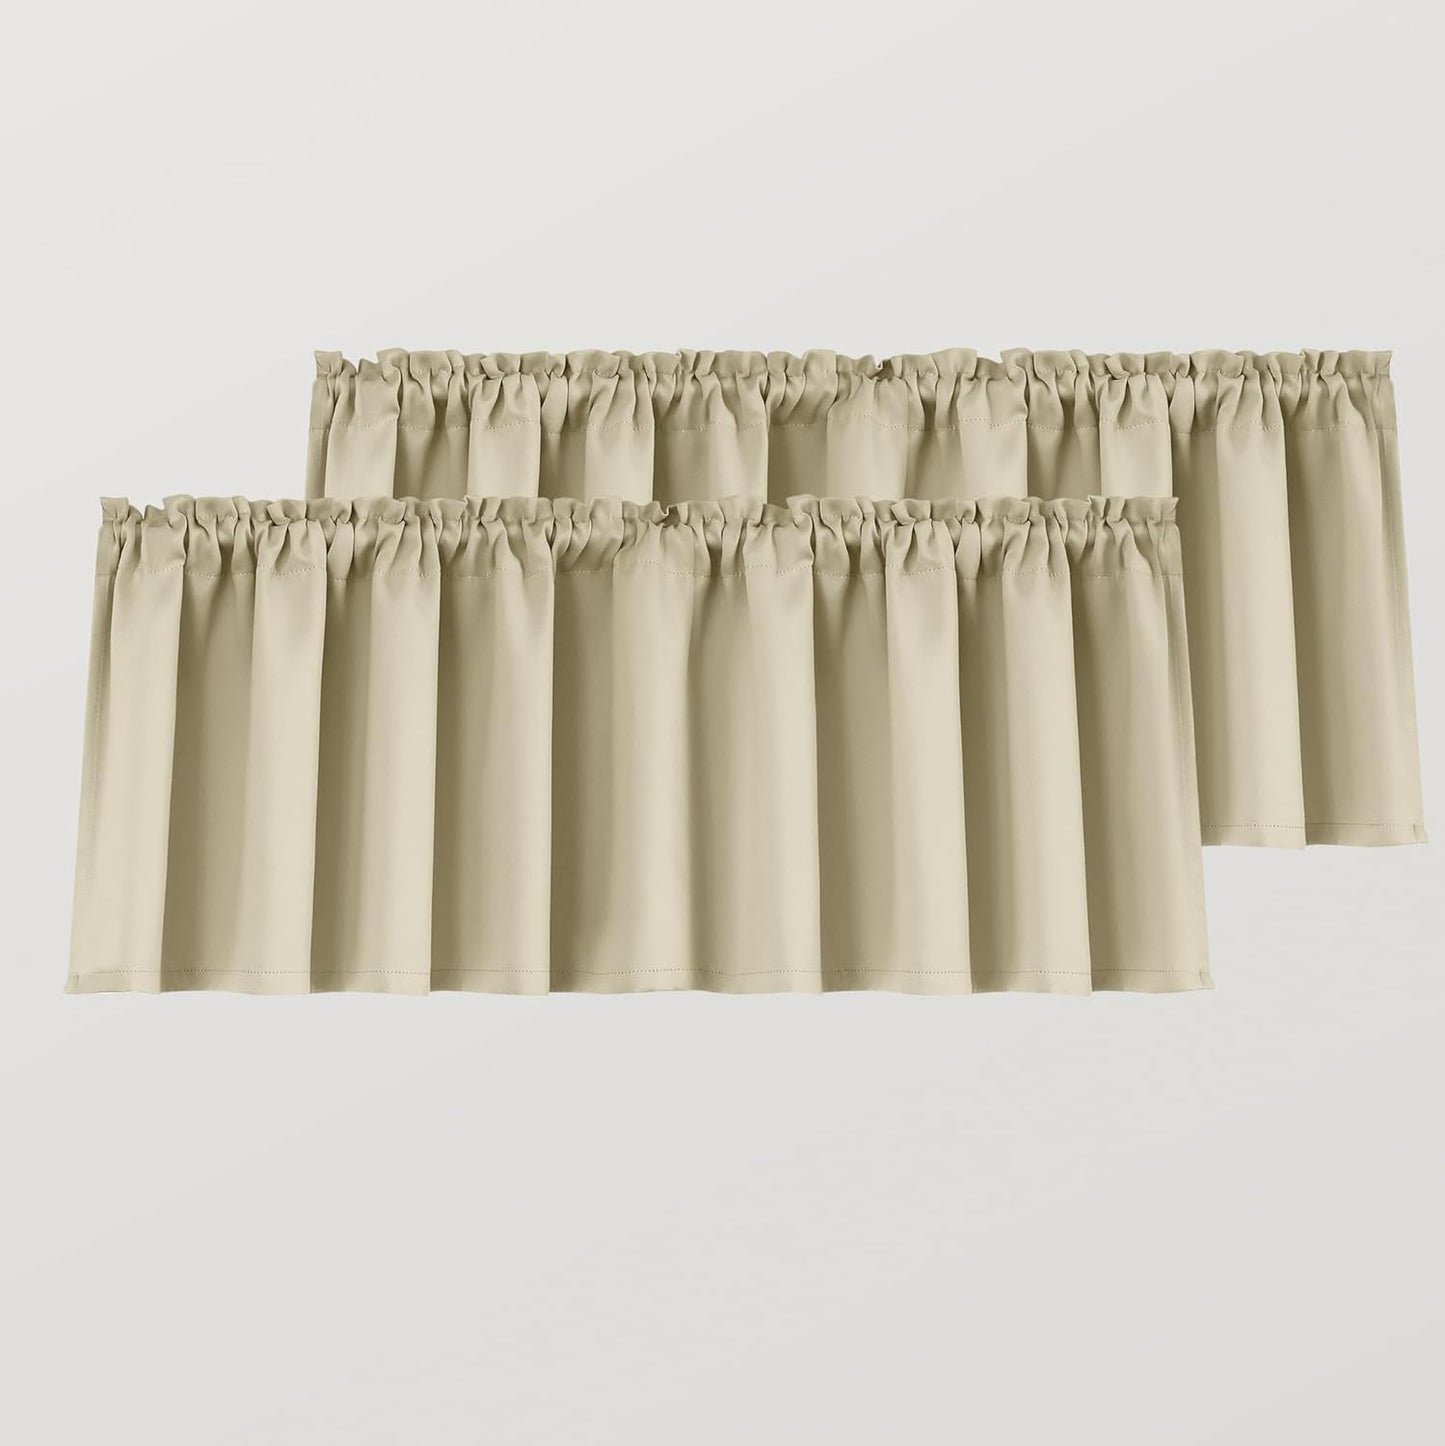 Mrs.Naturall Beige Valance Curtains for Windows 36X16 Inch Length  MRS.NATURALL TEXTILE Biscotti Beige 36X16 